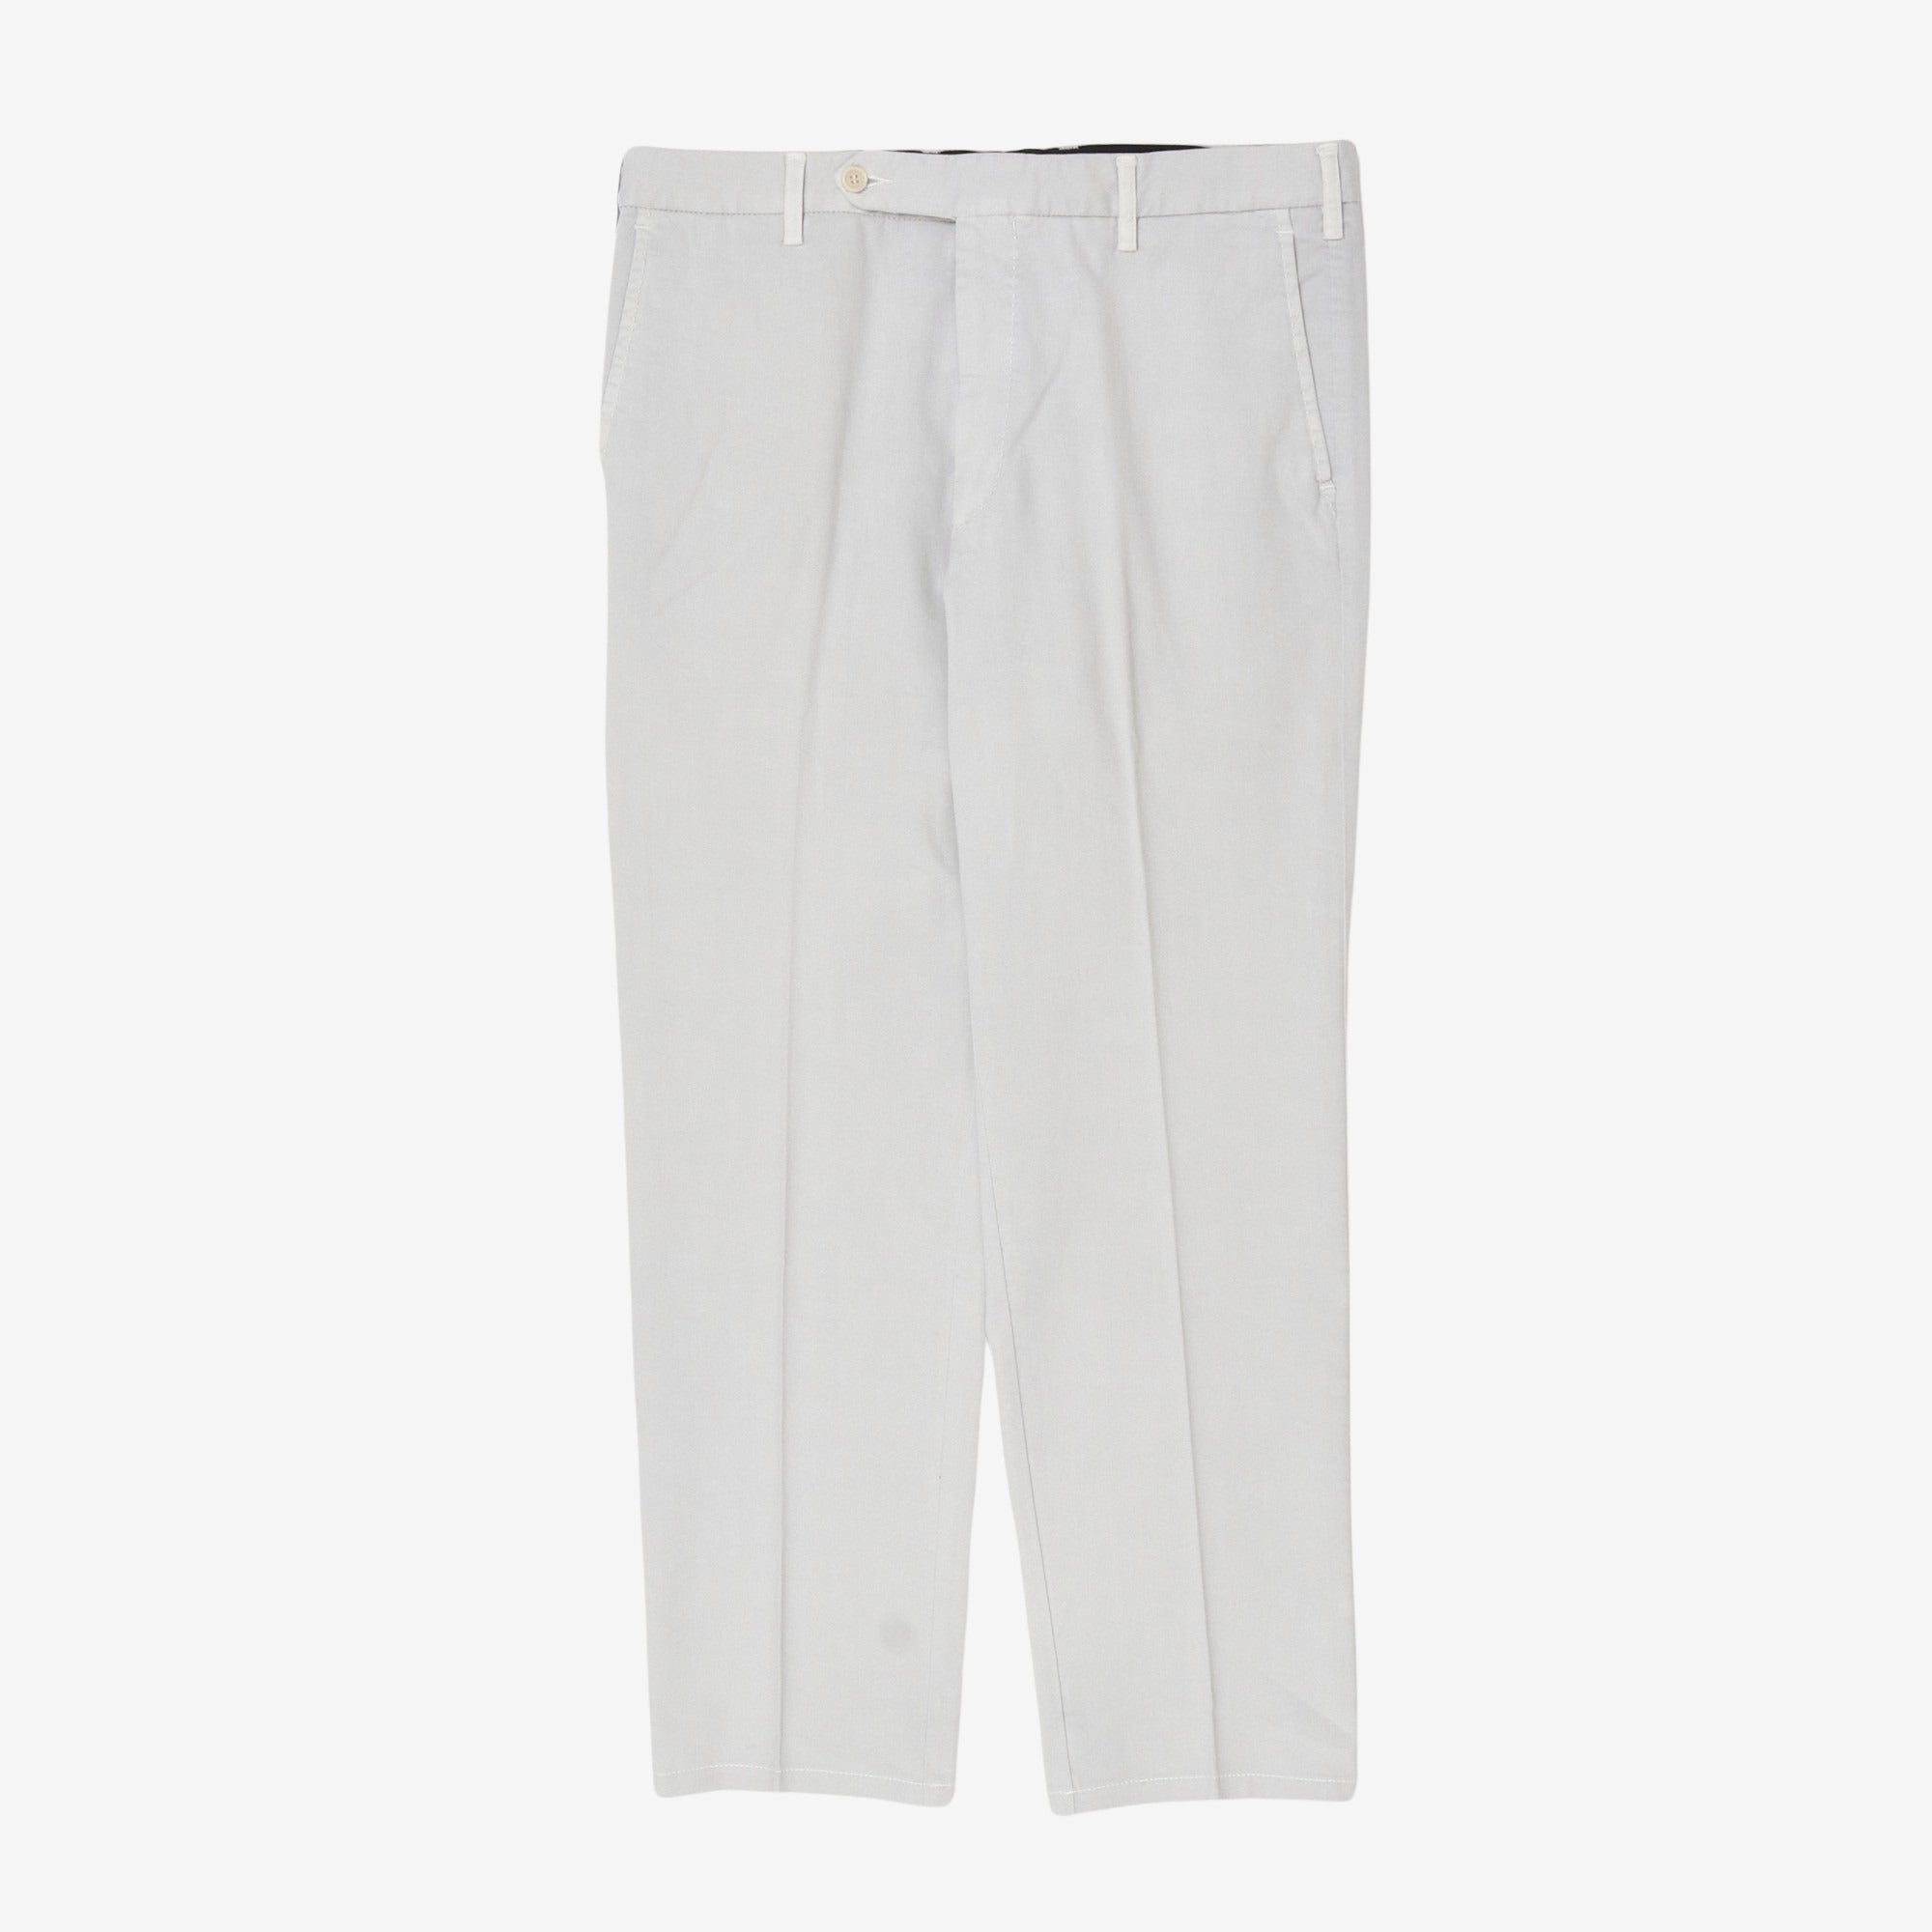 Cotton Pleated Chinos (34W x 28.5L)